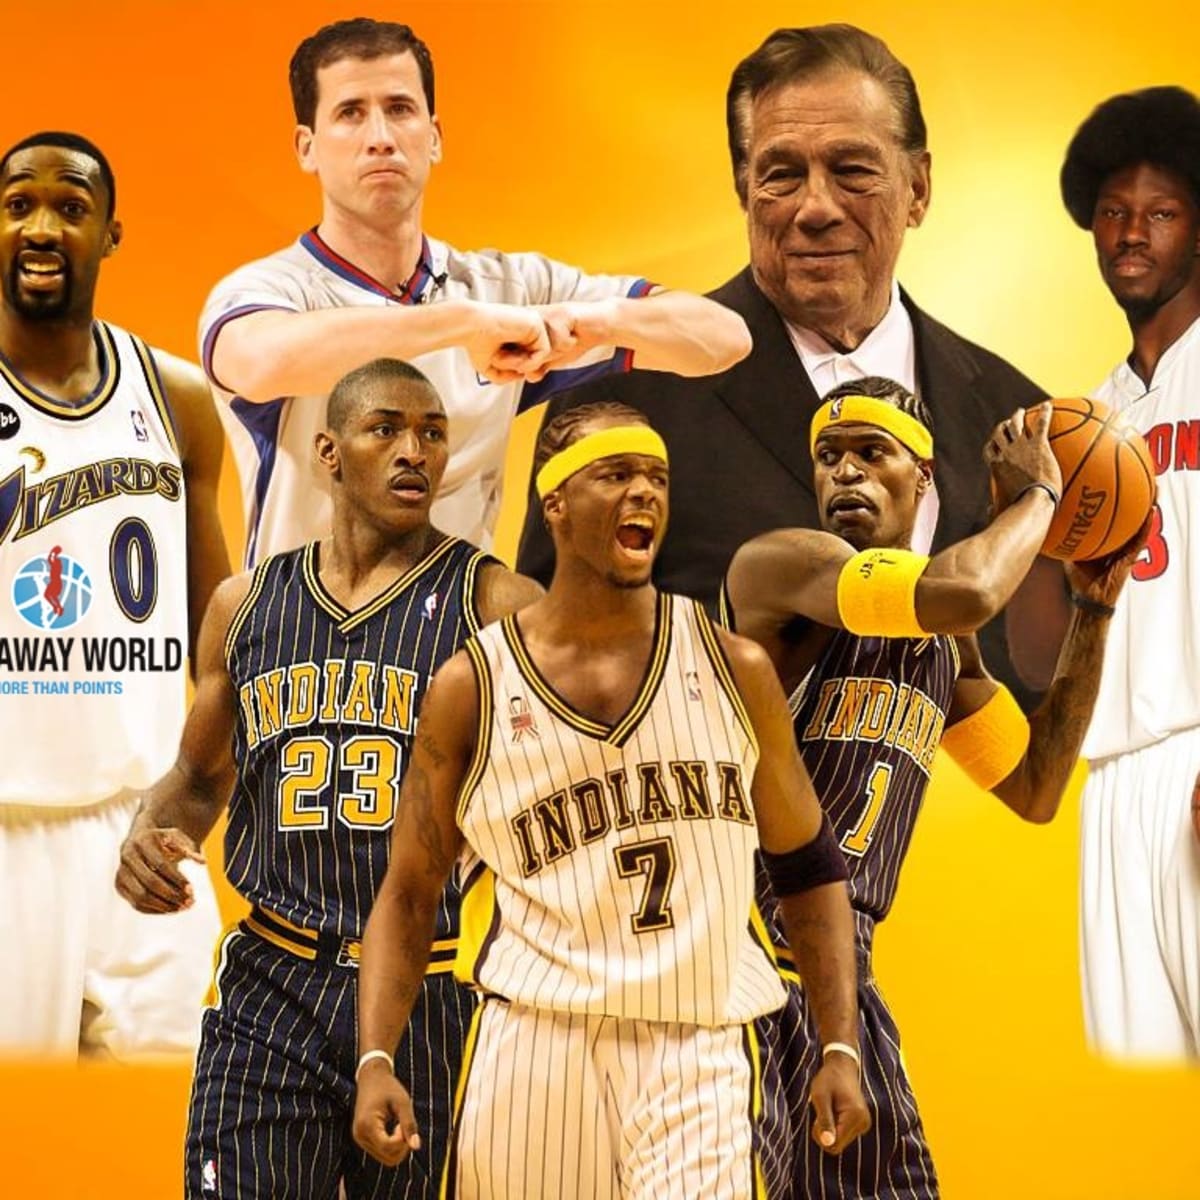 The '1999-2000 Indiana Pacers' quiz